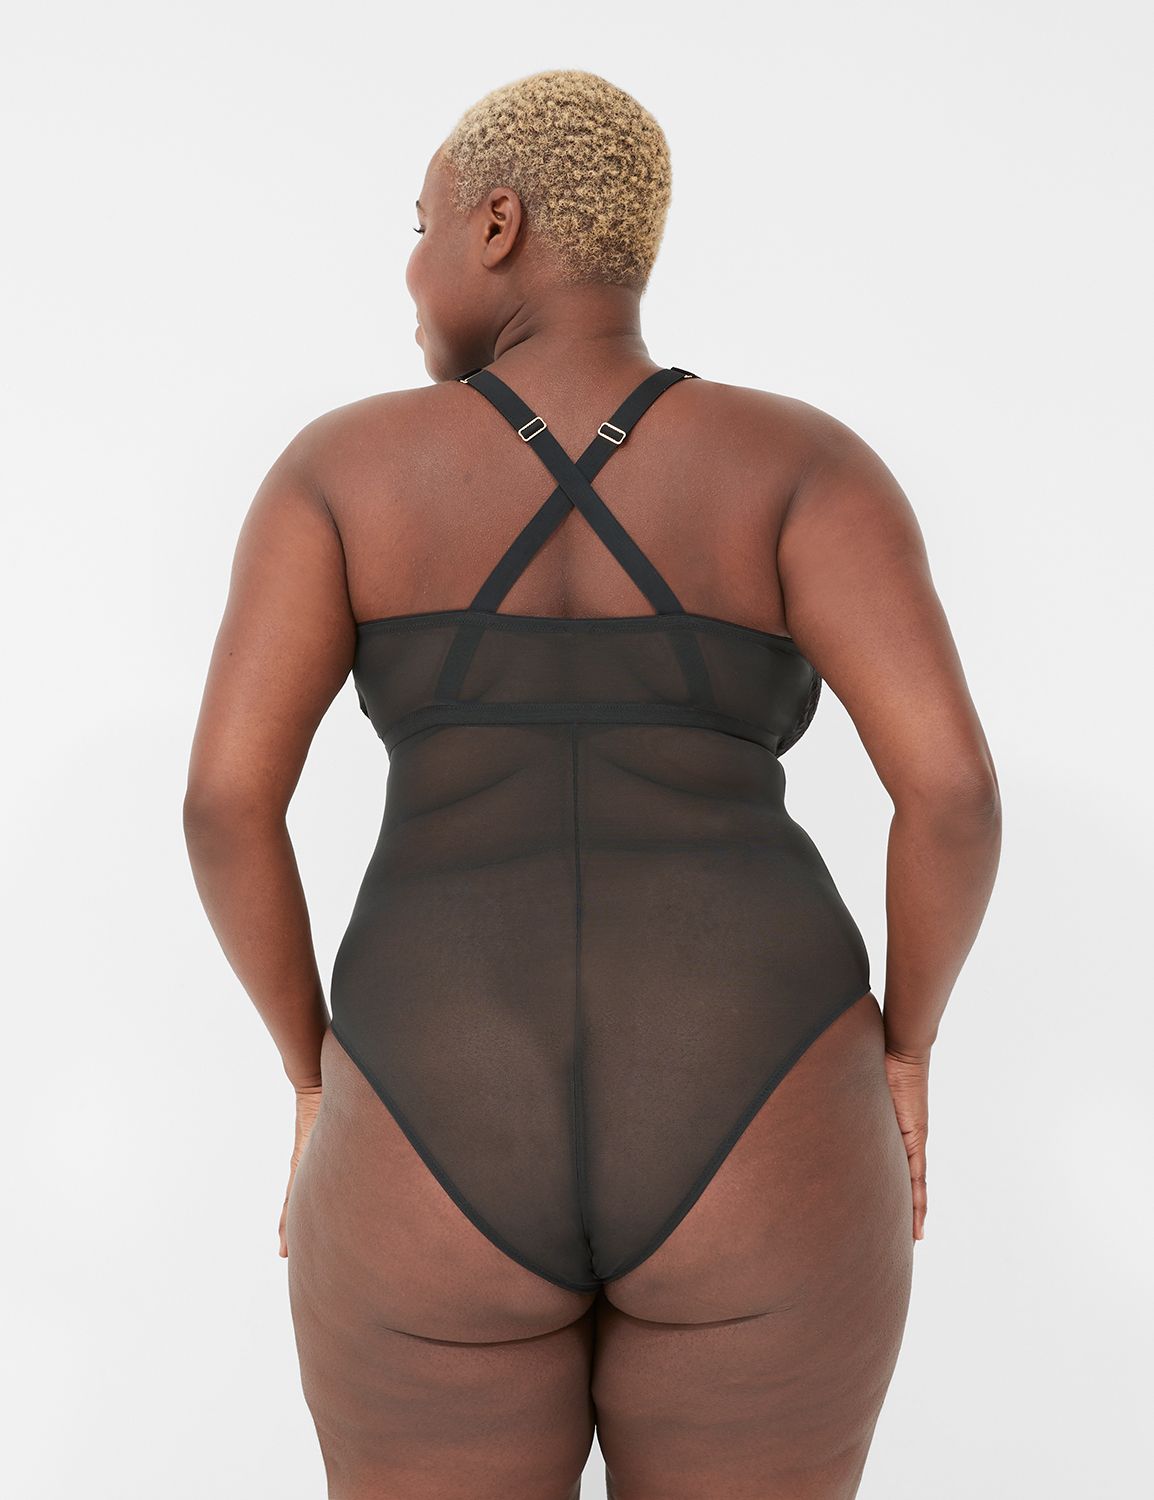 If you buy 2 bodysuits, you can get 3 more for free. Yes, get 5 and pa